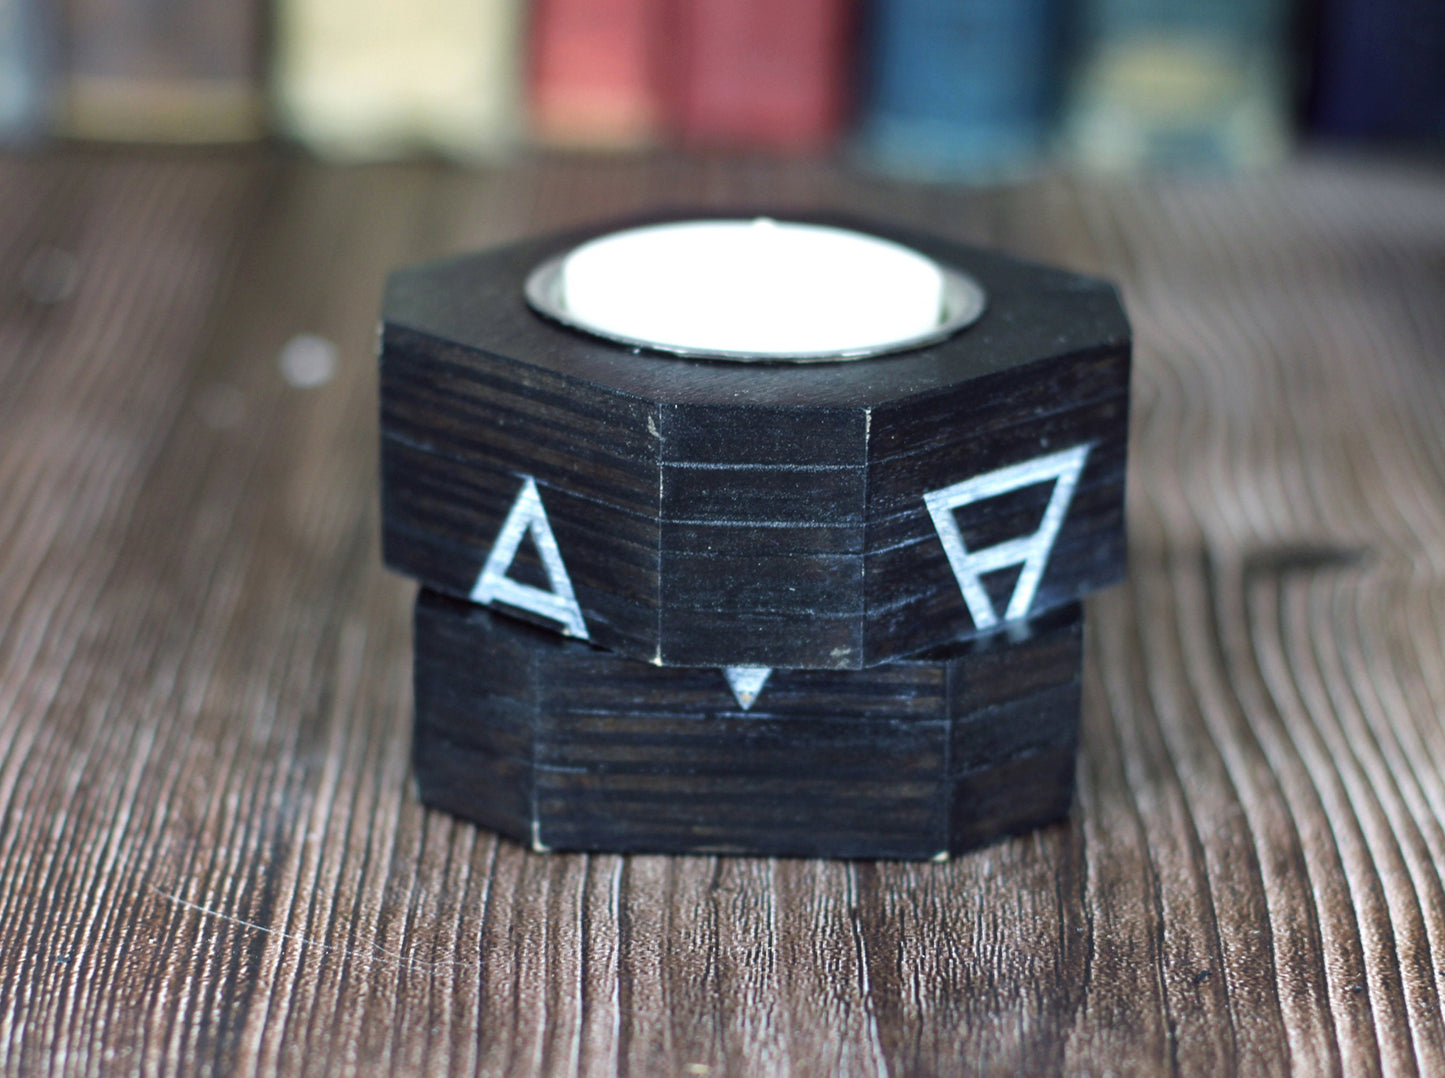 Secret compartment wooden candle holder with engraved Wicca elemental symbols, stash your valuables safely in the hidden tin